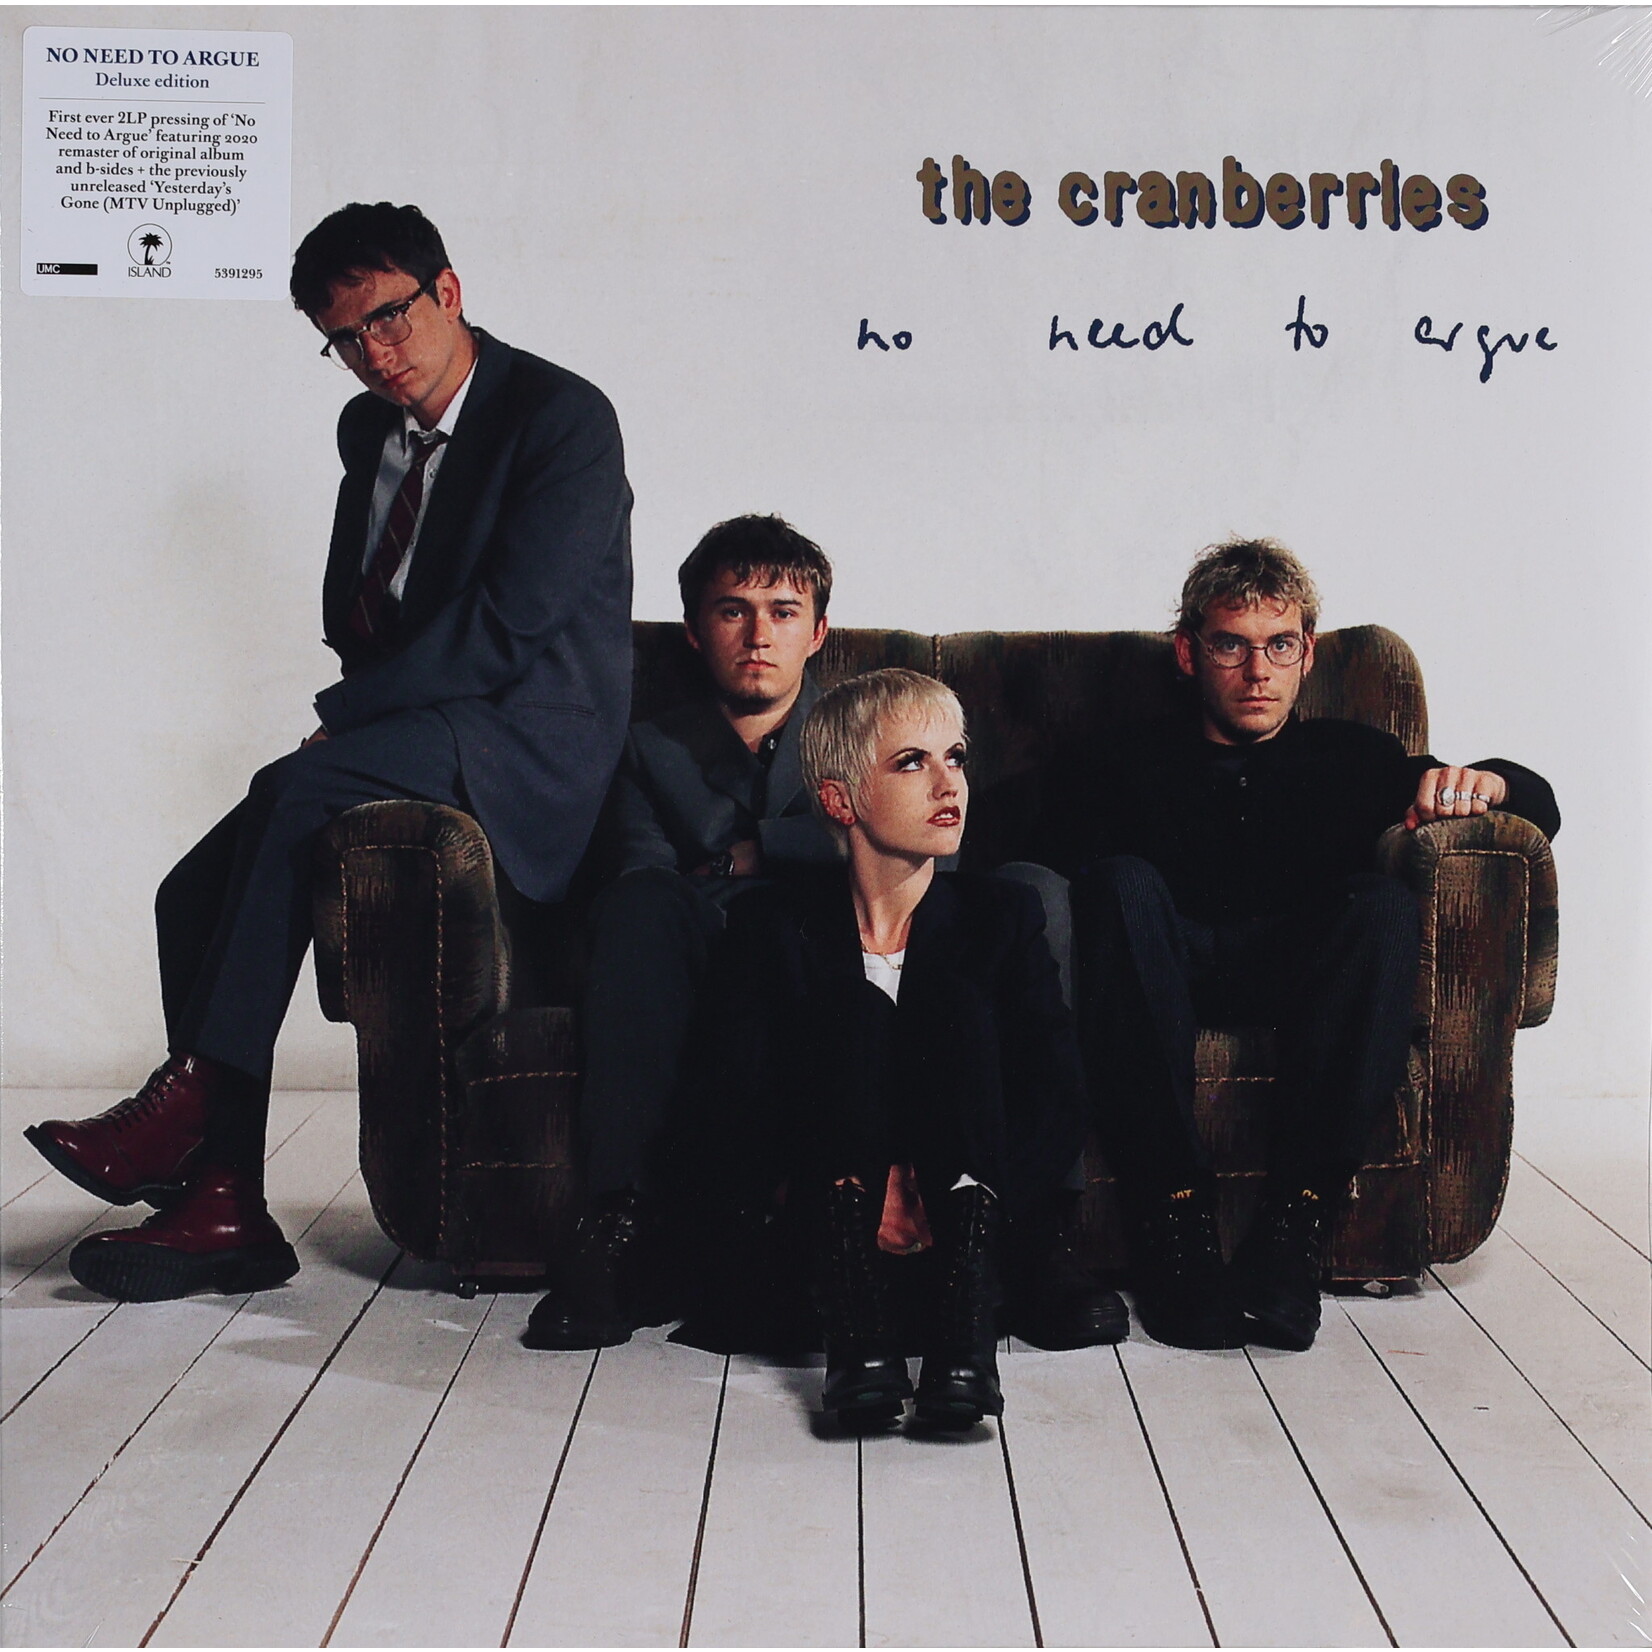 CRANBERRIES, THE - NO NEED TO ARGUE - 2LP